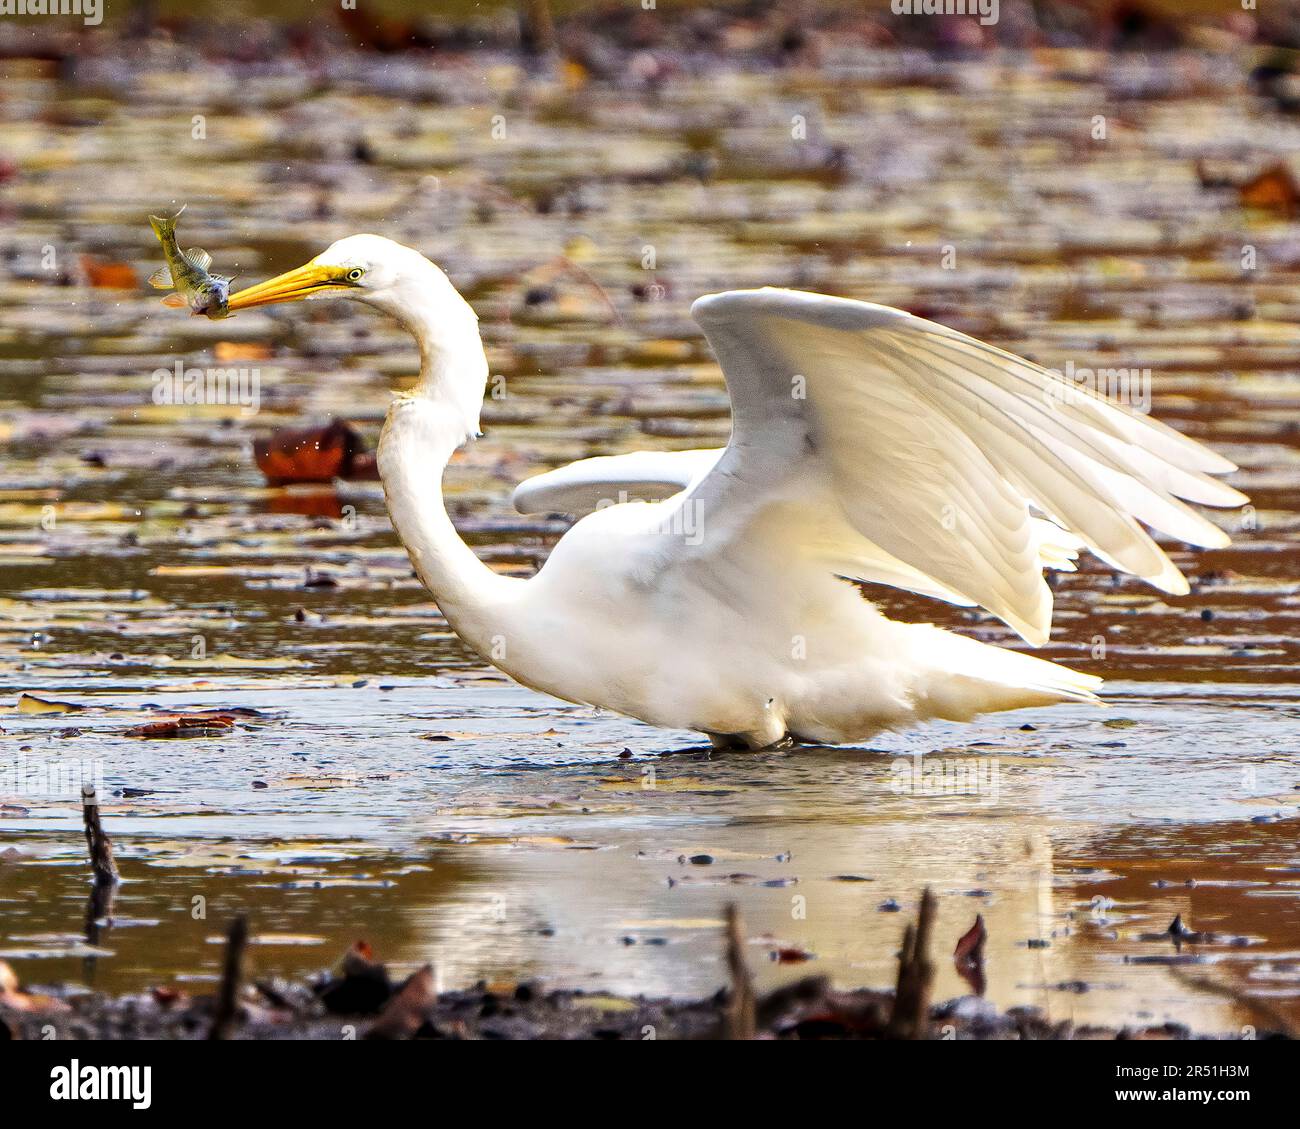 Great White Egret close-up profile side view with a fish in its beak in shallow water with foliage background in its environment and wetland habitat. Stock Photo